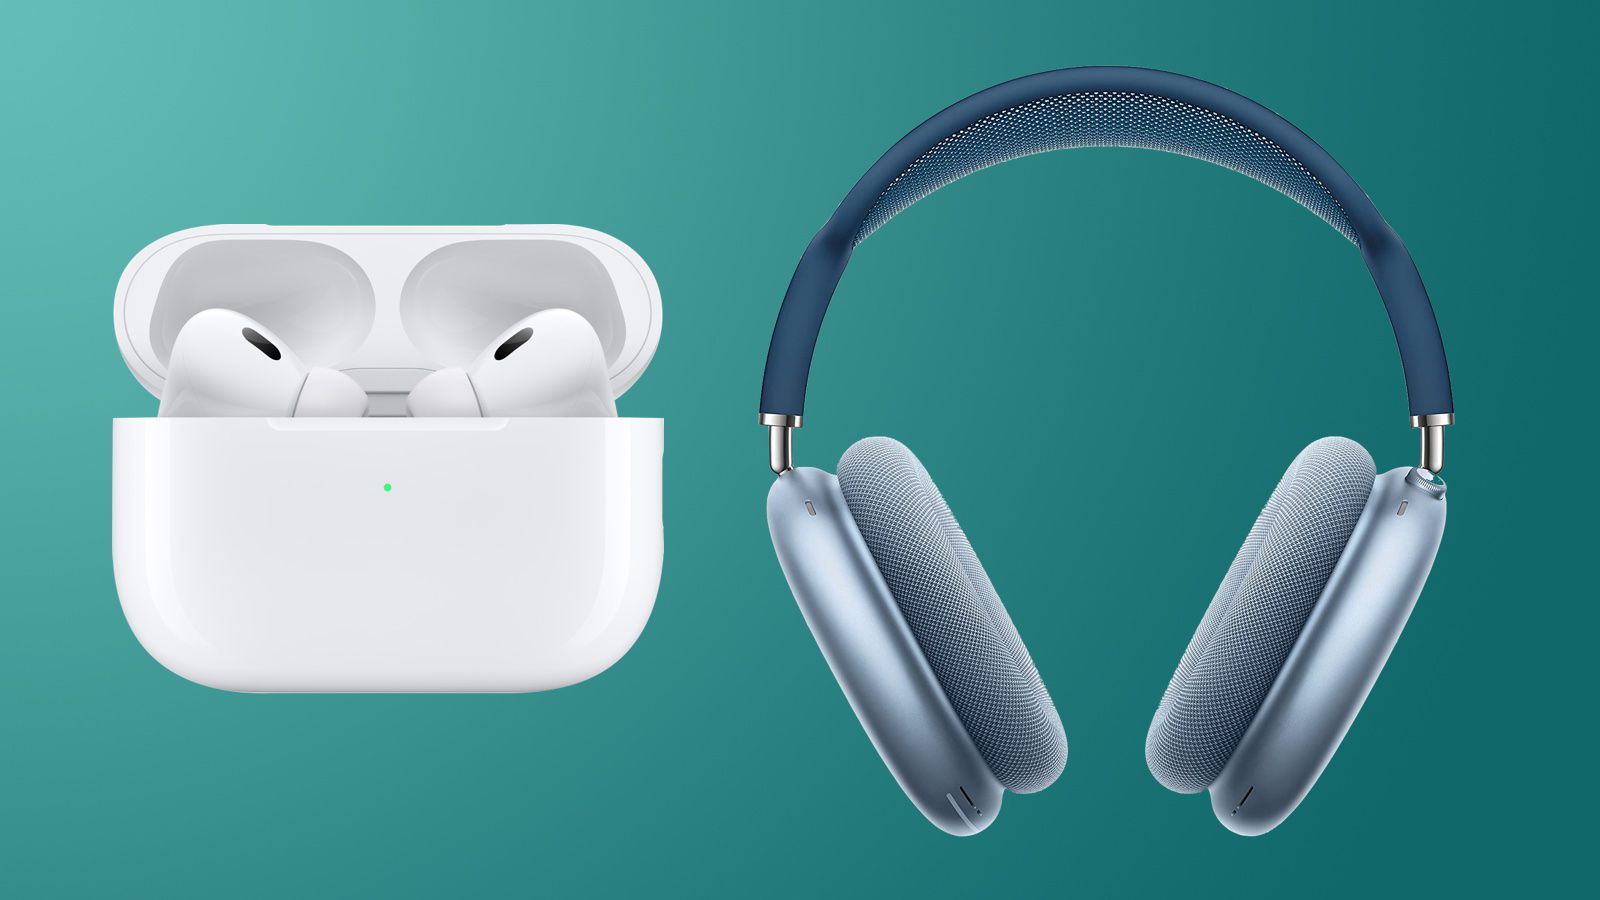 Compared: New AirPods Pro versus original AirPods Pro - General